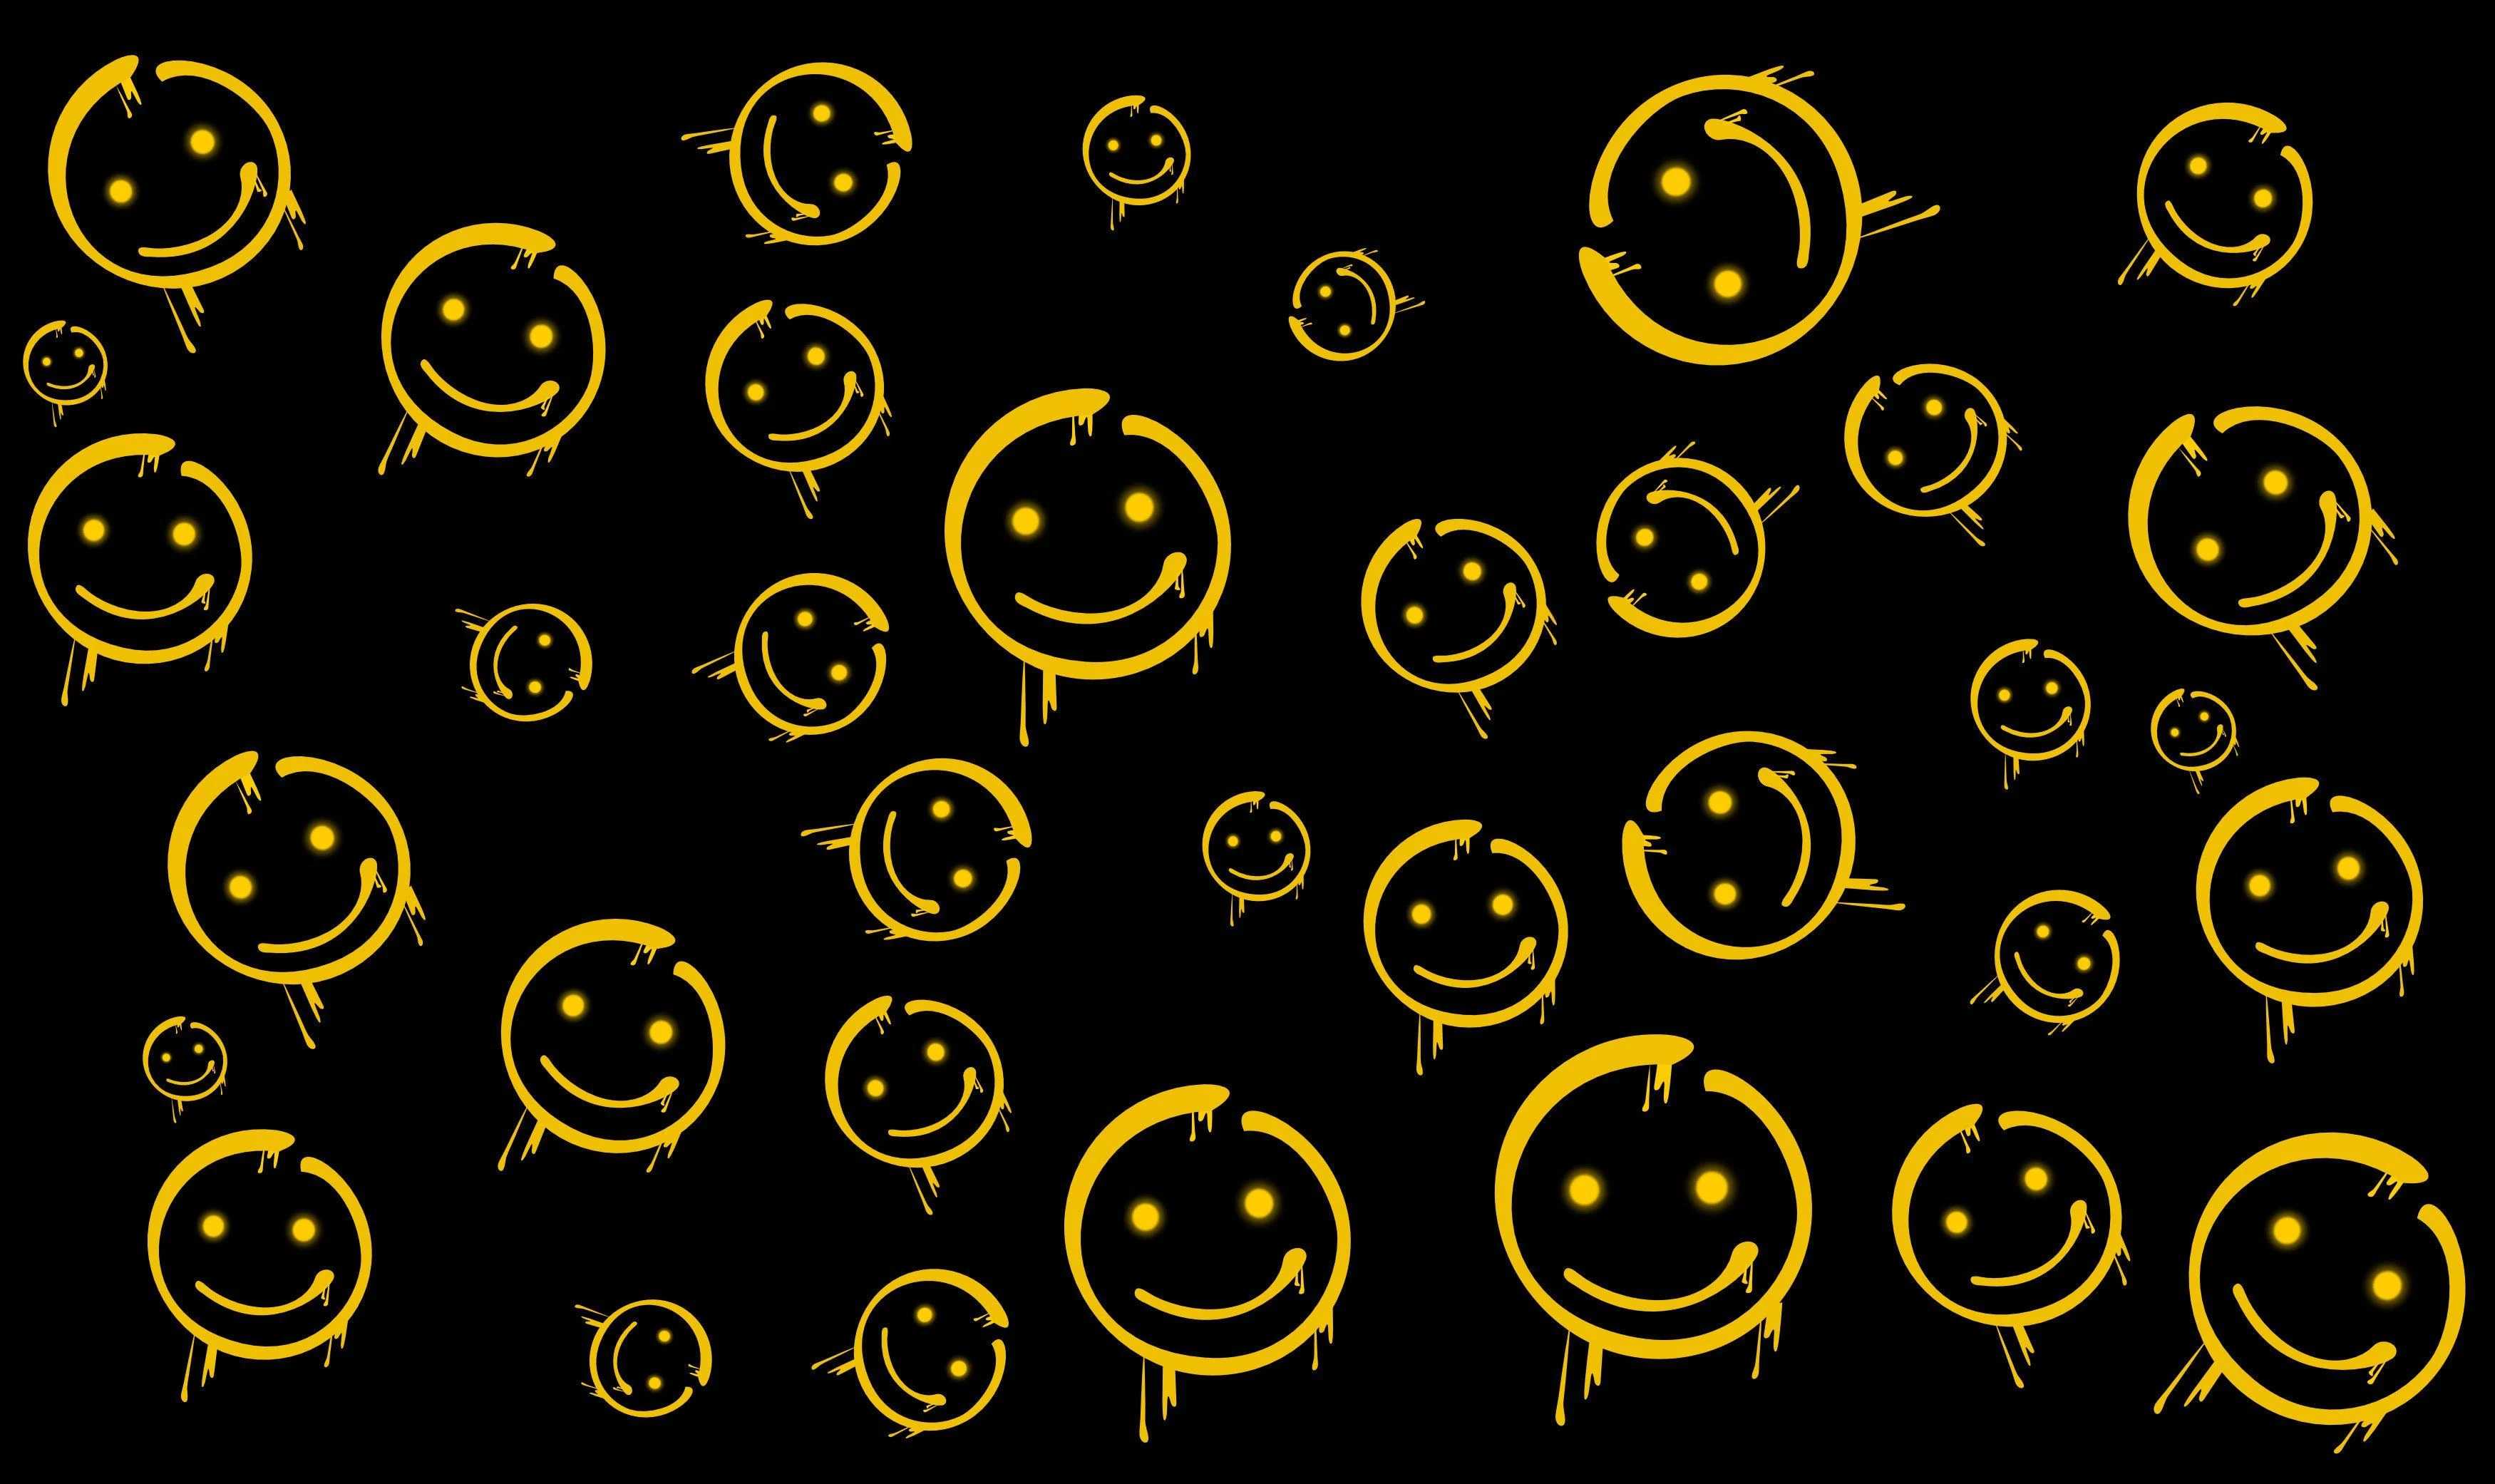 A yellow smiley face on black background - Smiley